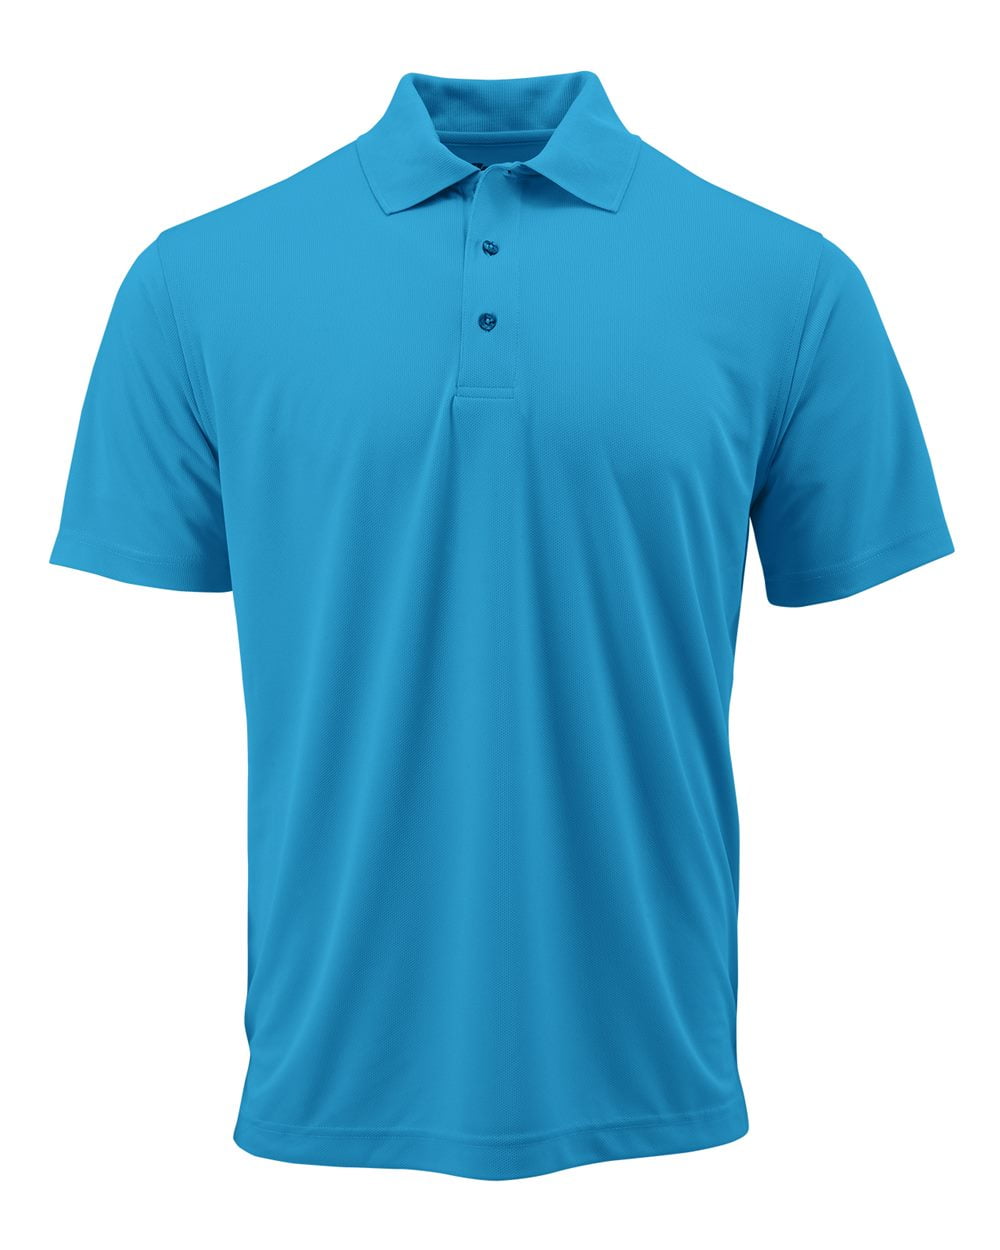 Paragon 108Y-TURQUOISE-XS Youth Saratoga Performance Polo44; Turquoise Extra Small